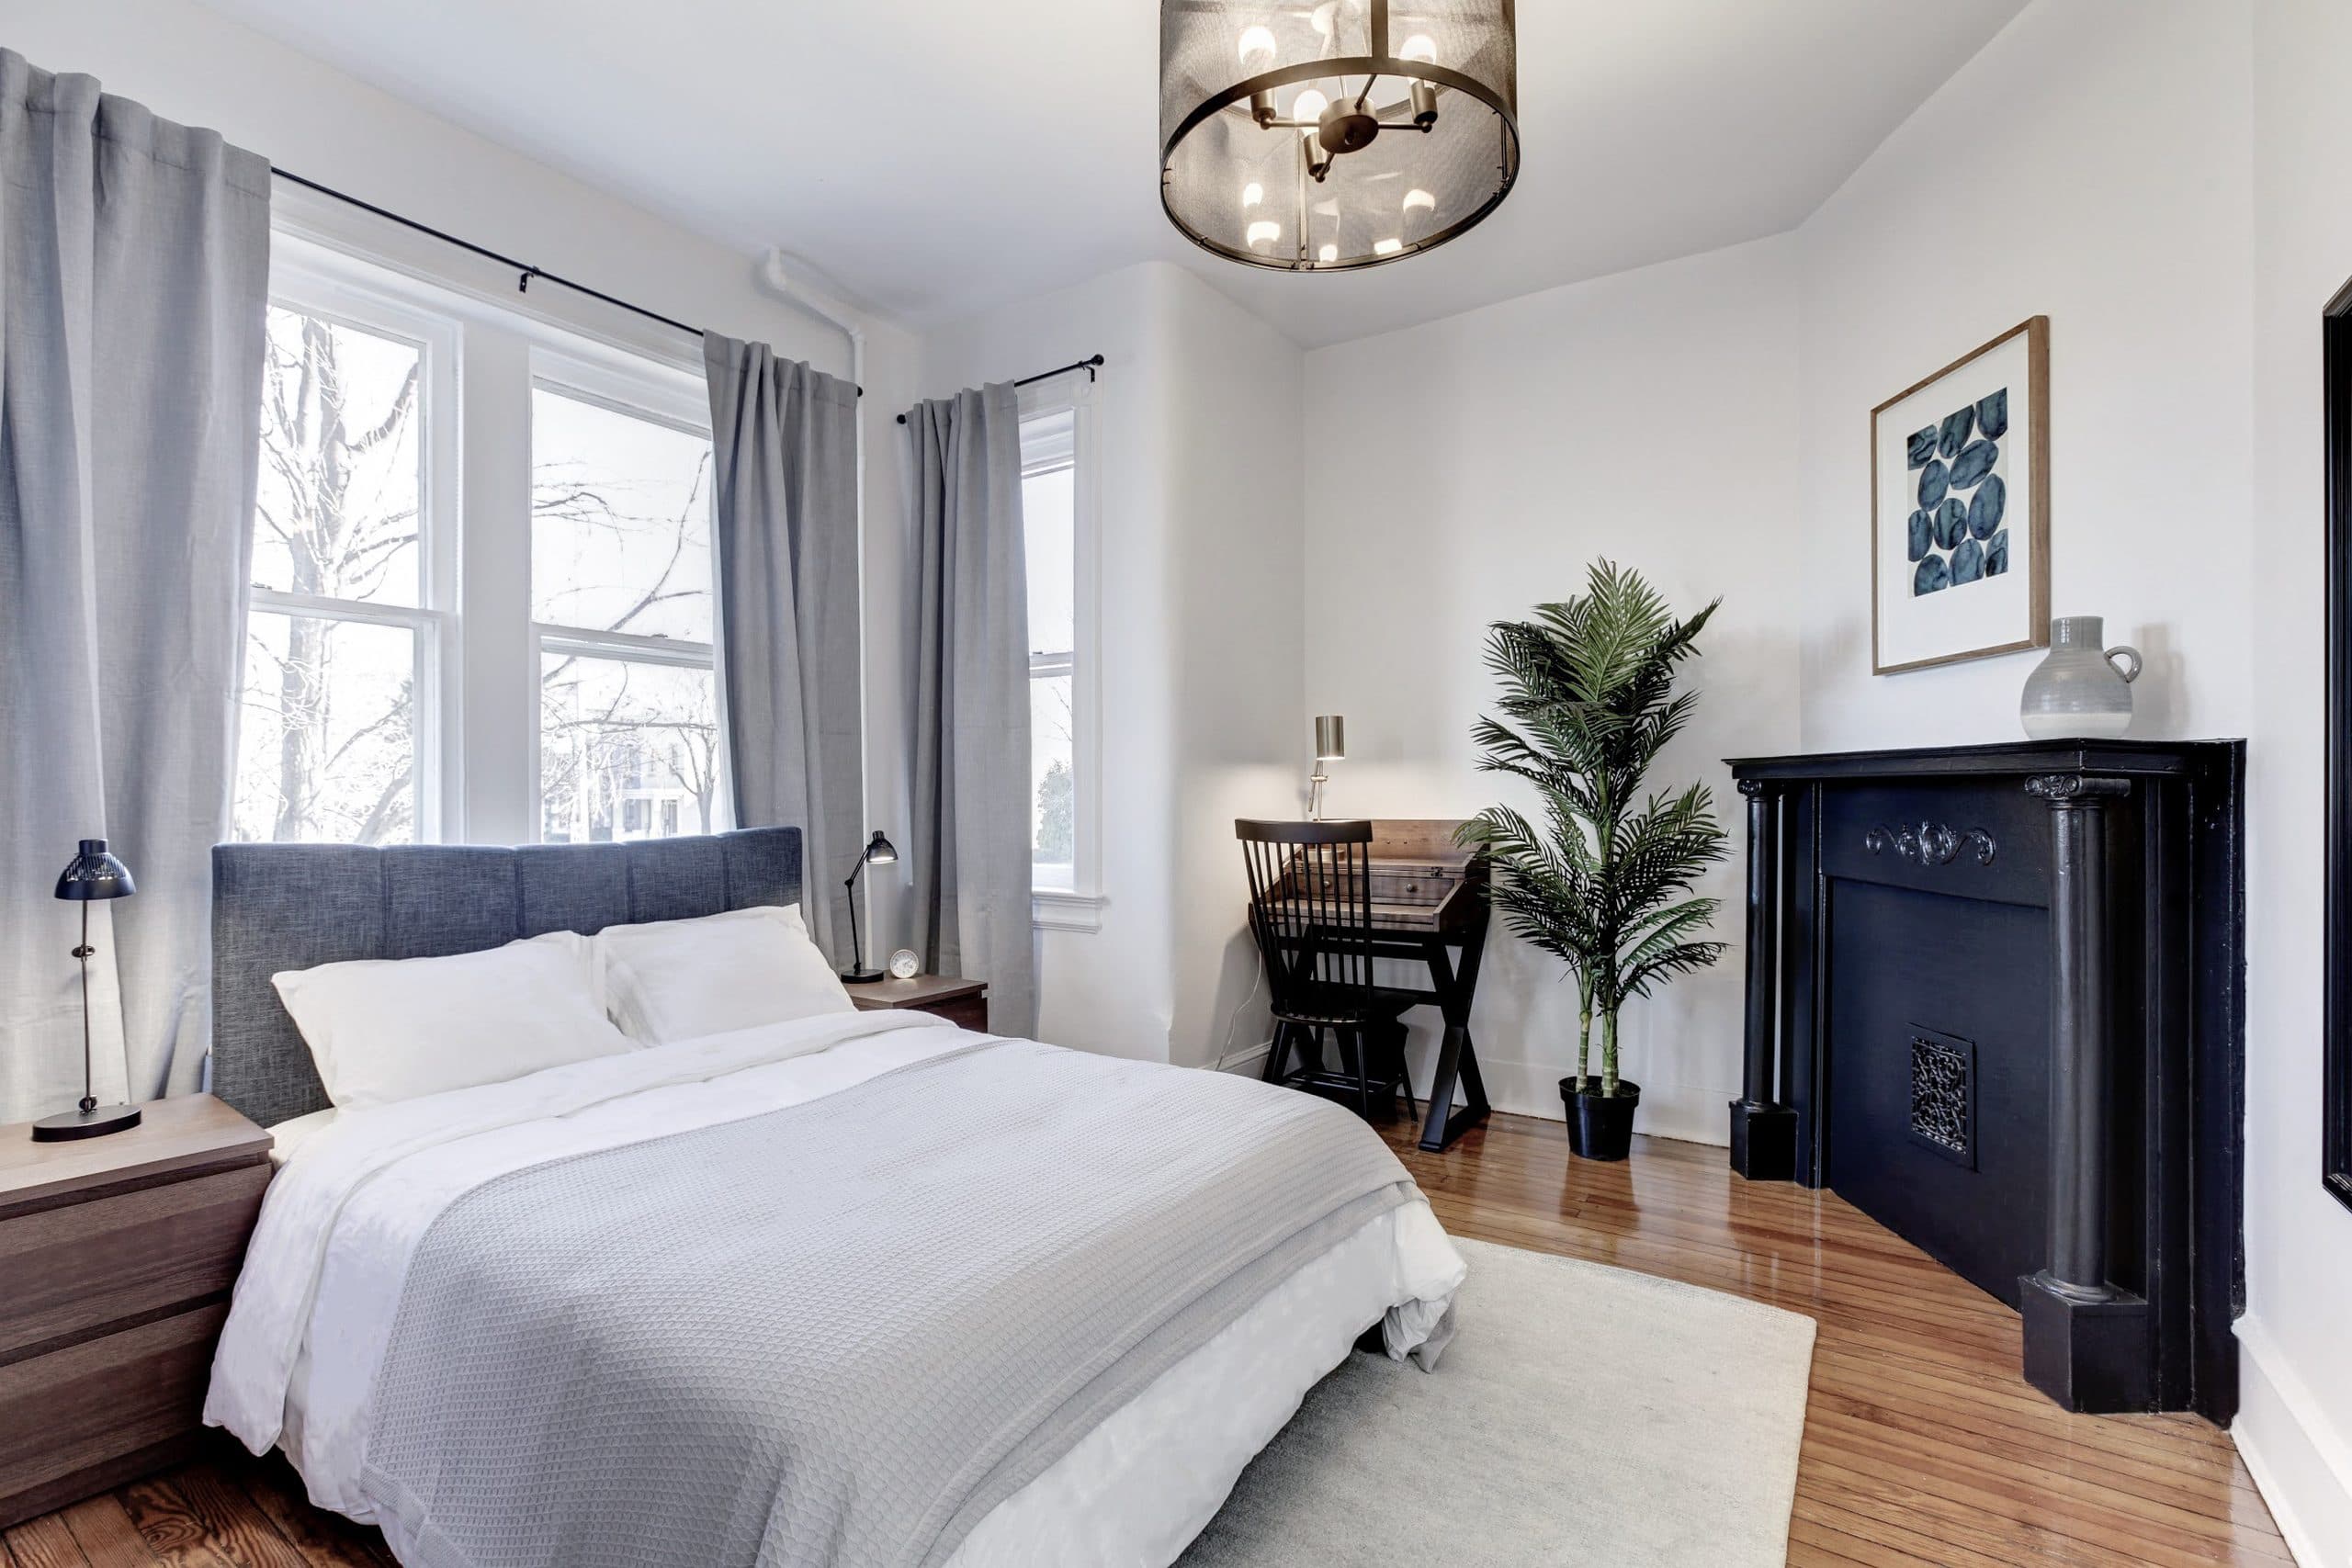 Photo 1 of #138: Queen Bedroom 1A at June Homes